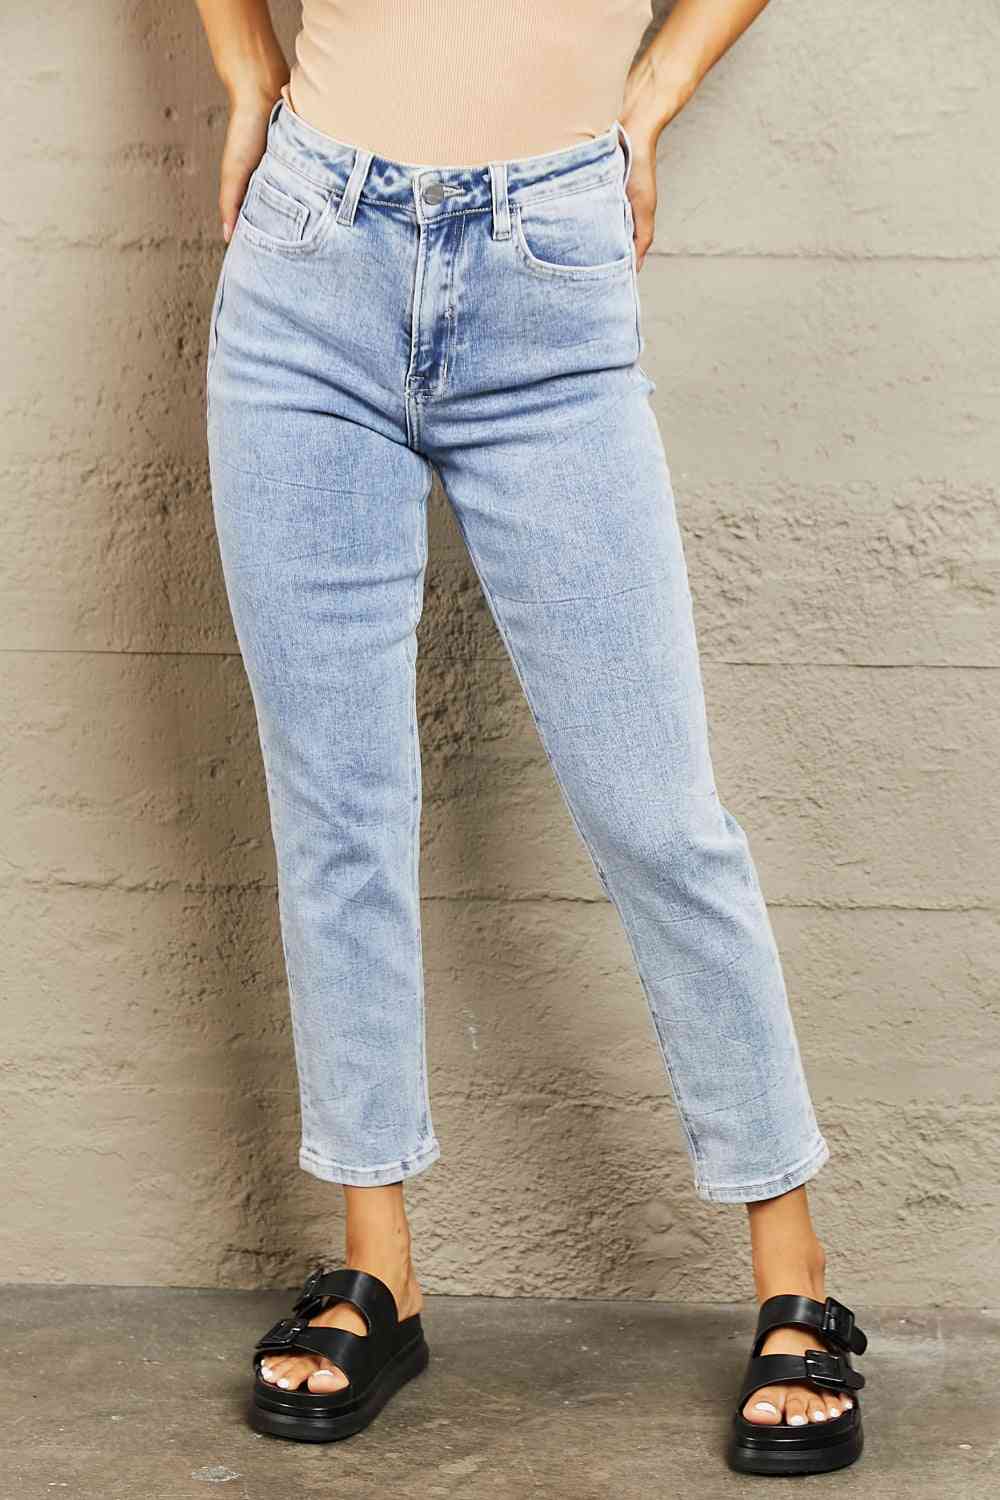 Rosy Brown BAYEAS High Waisted Skinny Jeans Sentient Beauty Fashions Apparel & Accessories